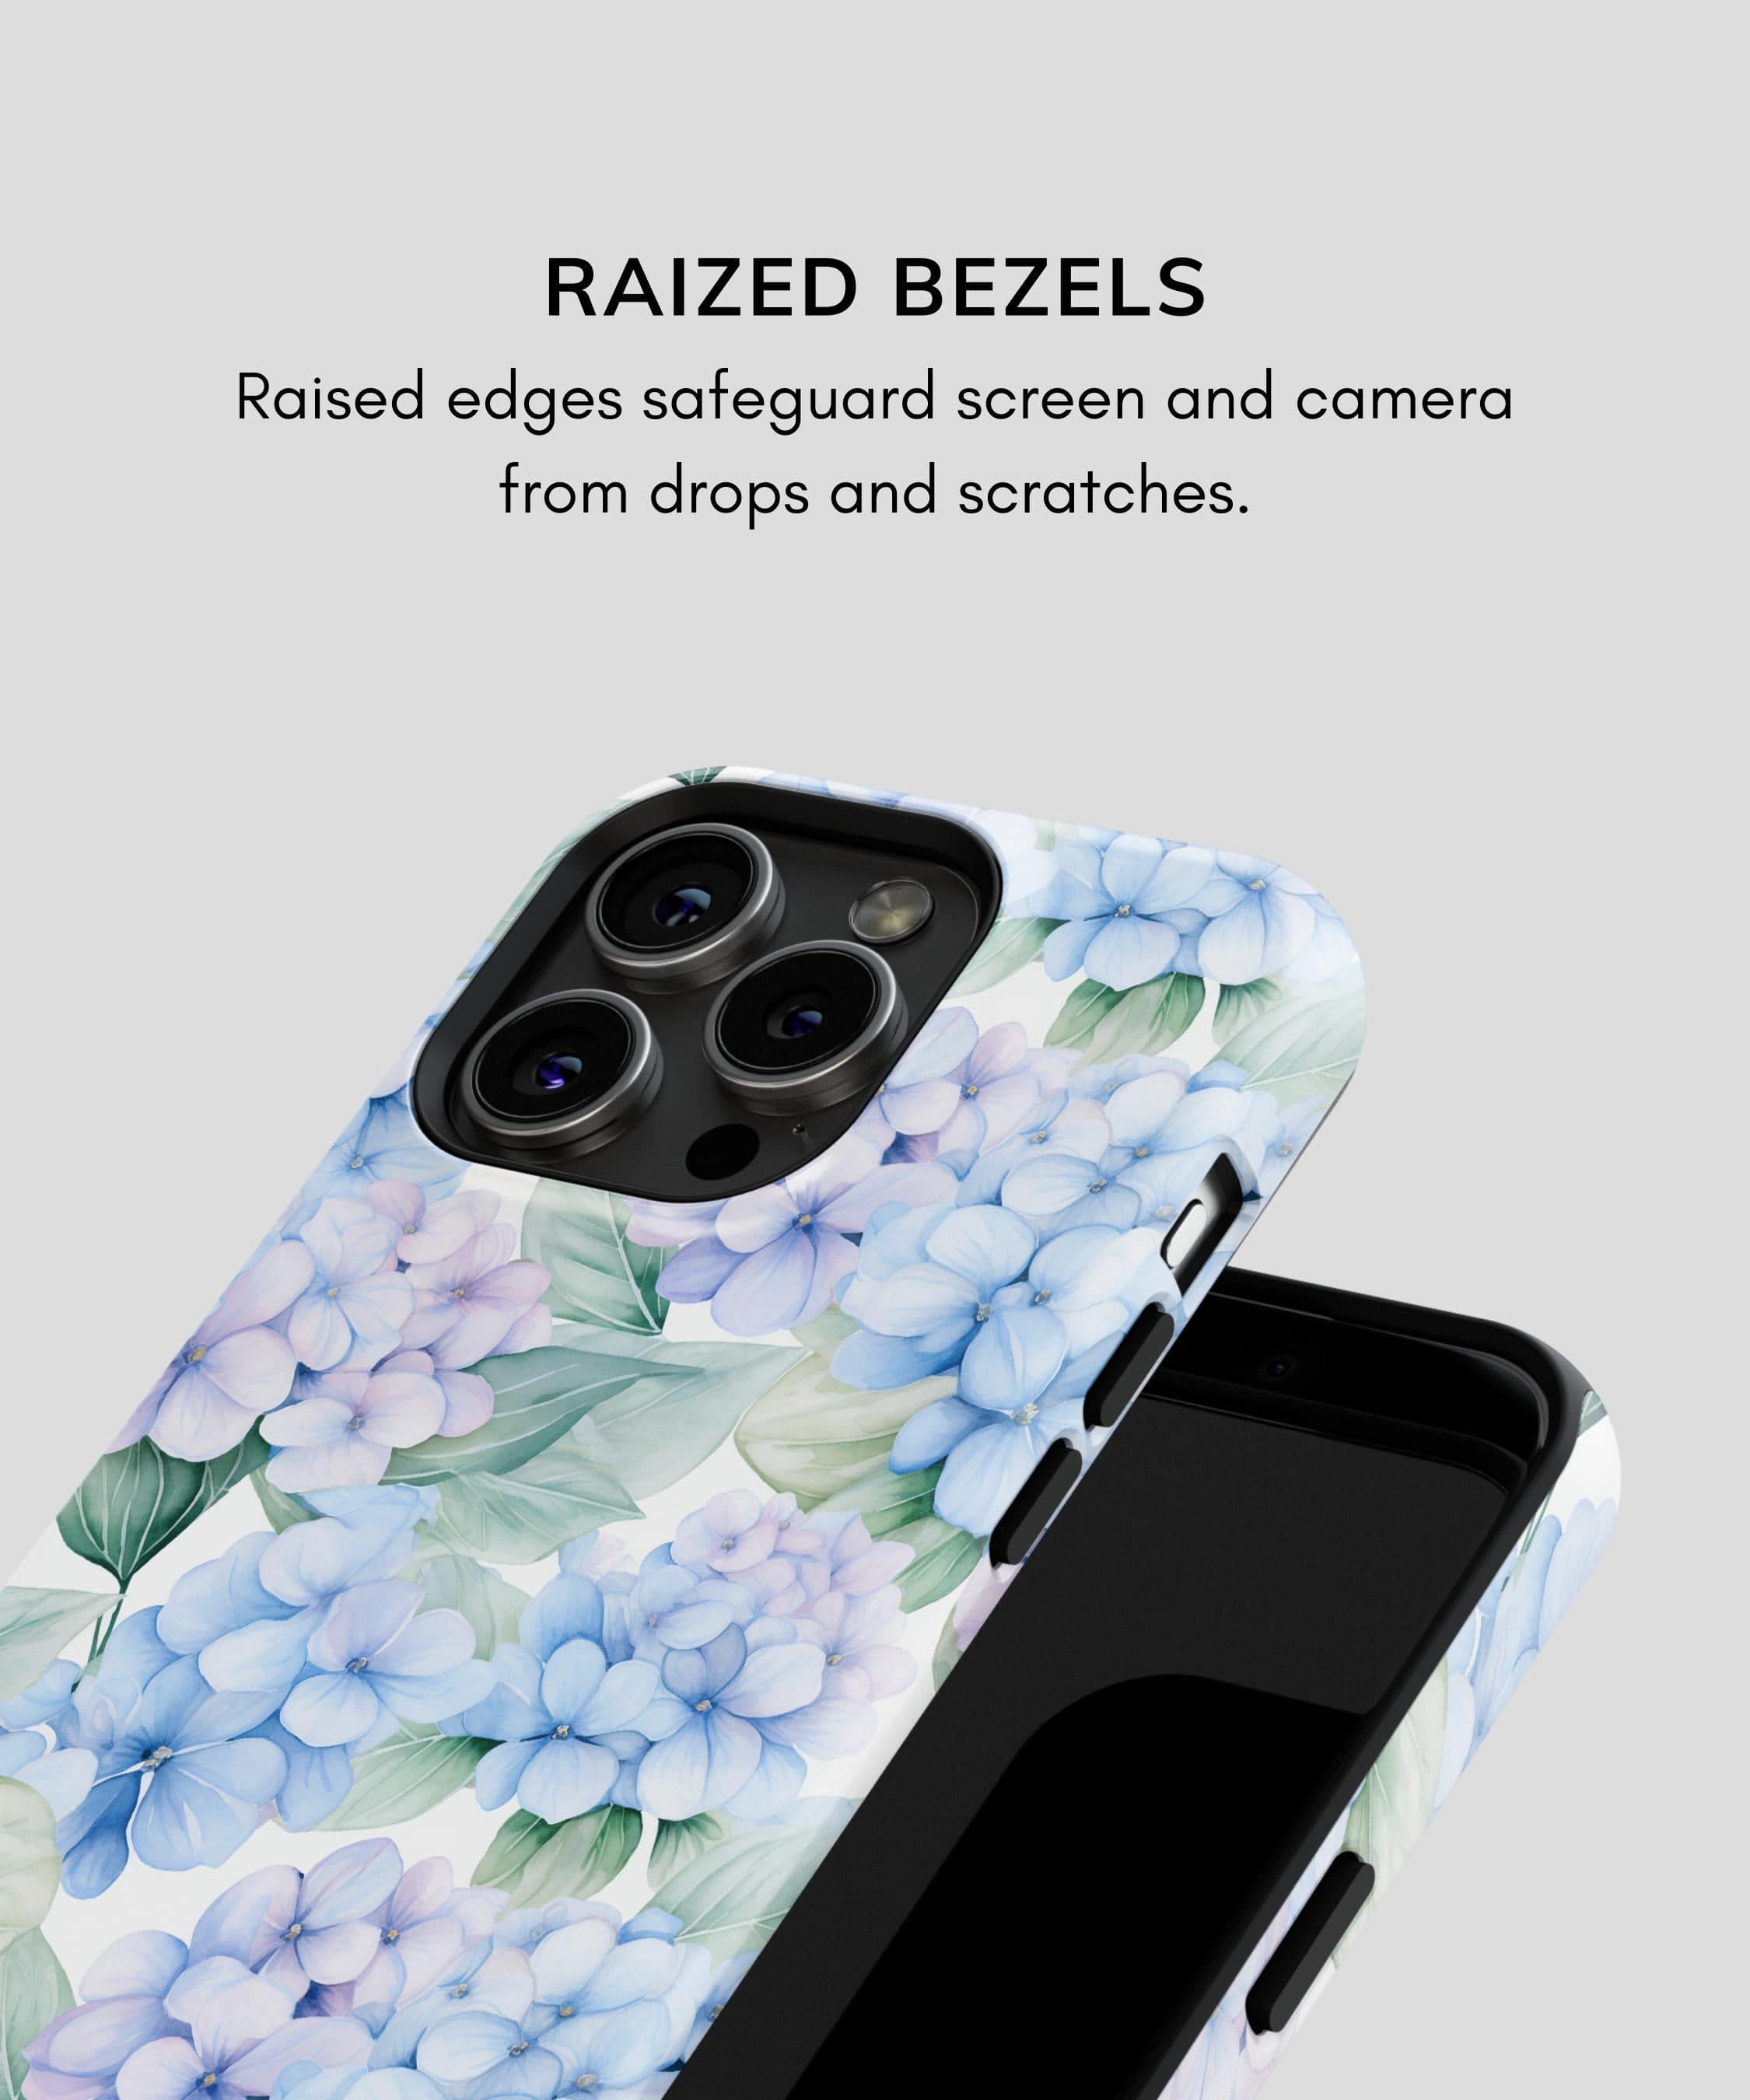 Floral Odyssey iPhone Case